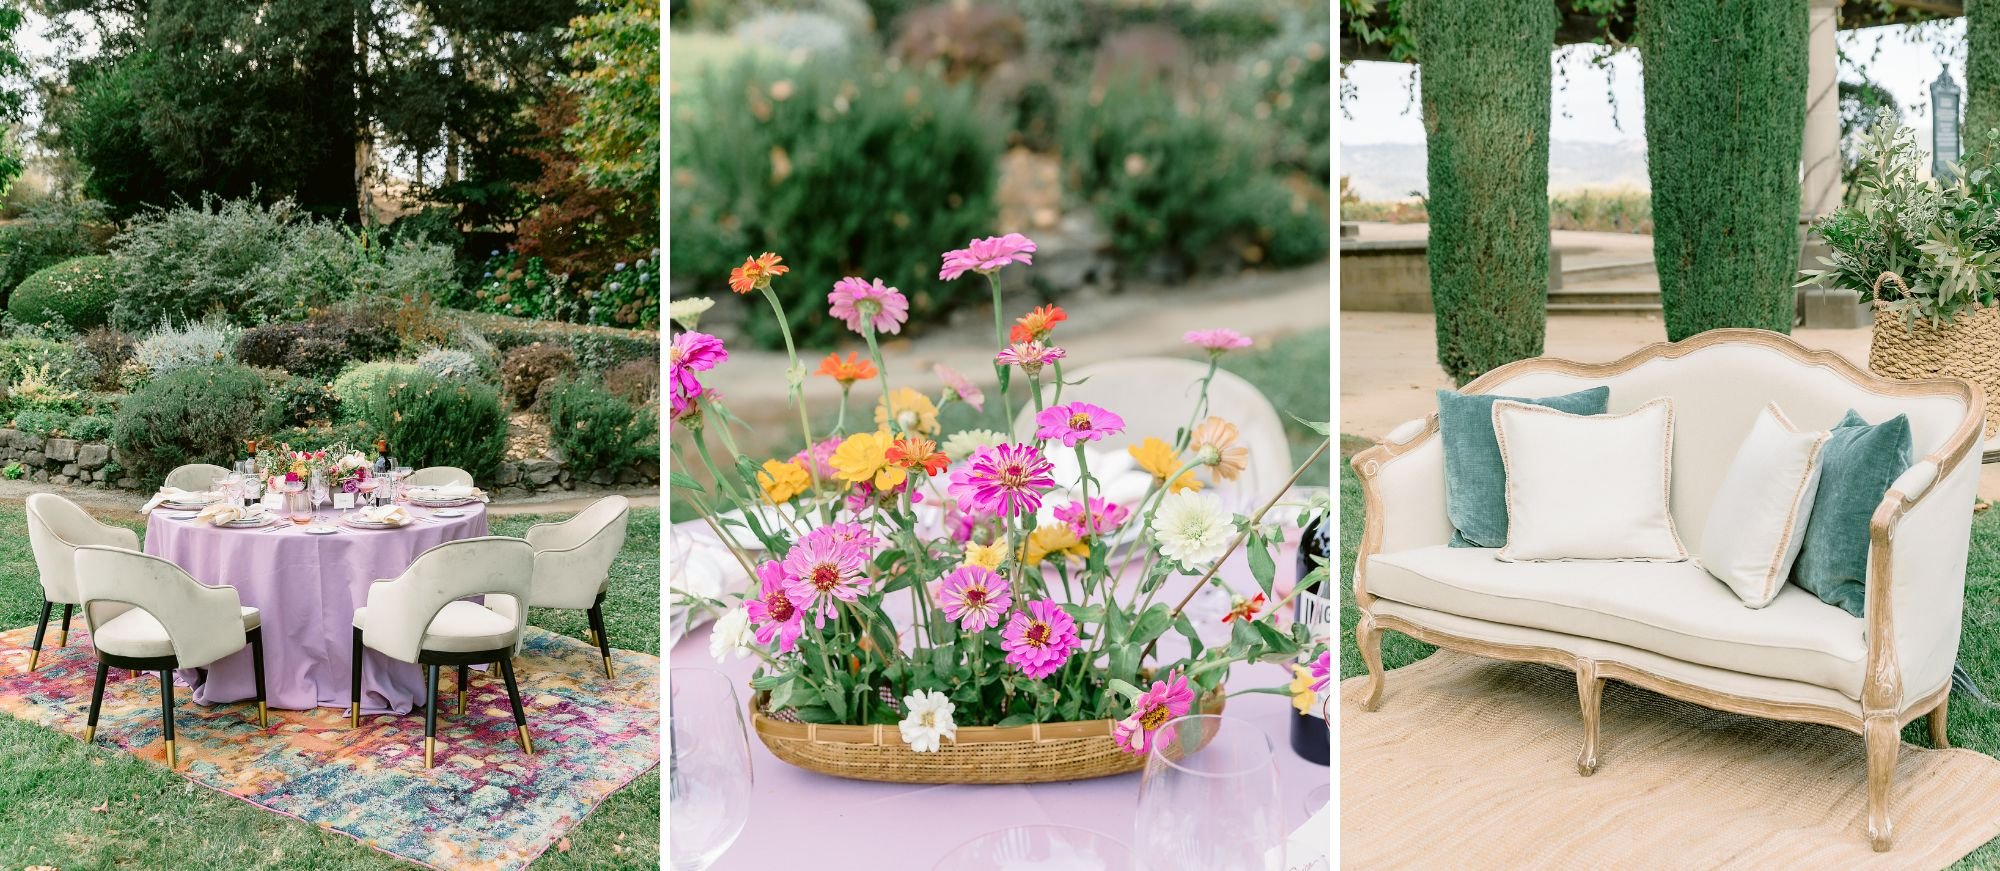 colorful and whimsical details at outdoor event